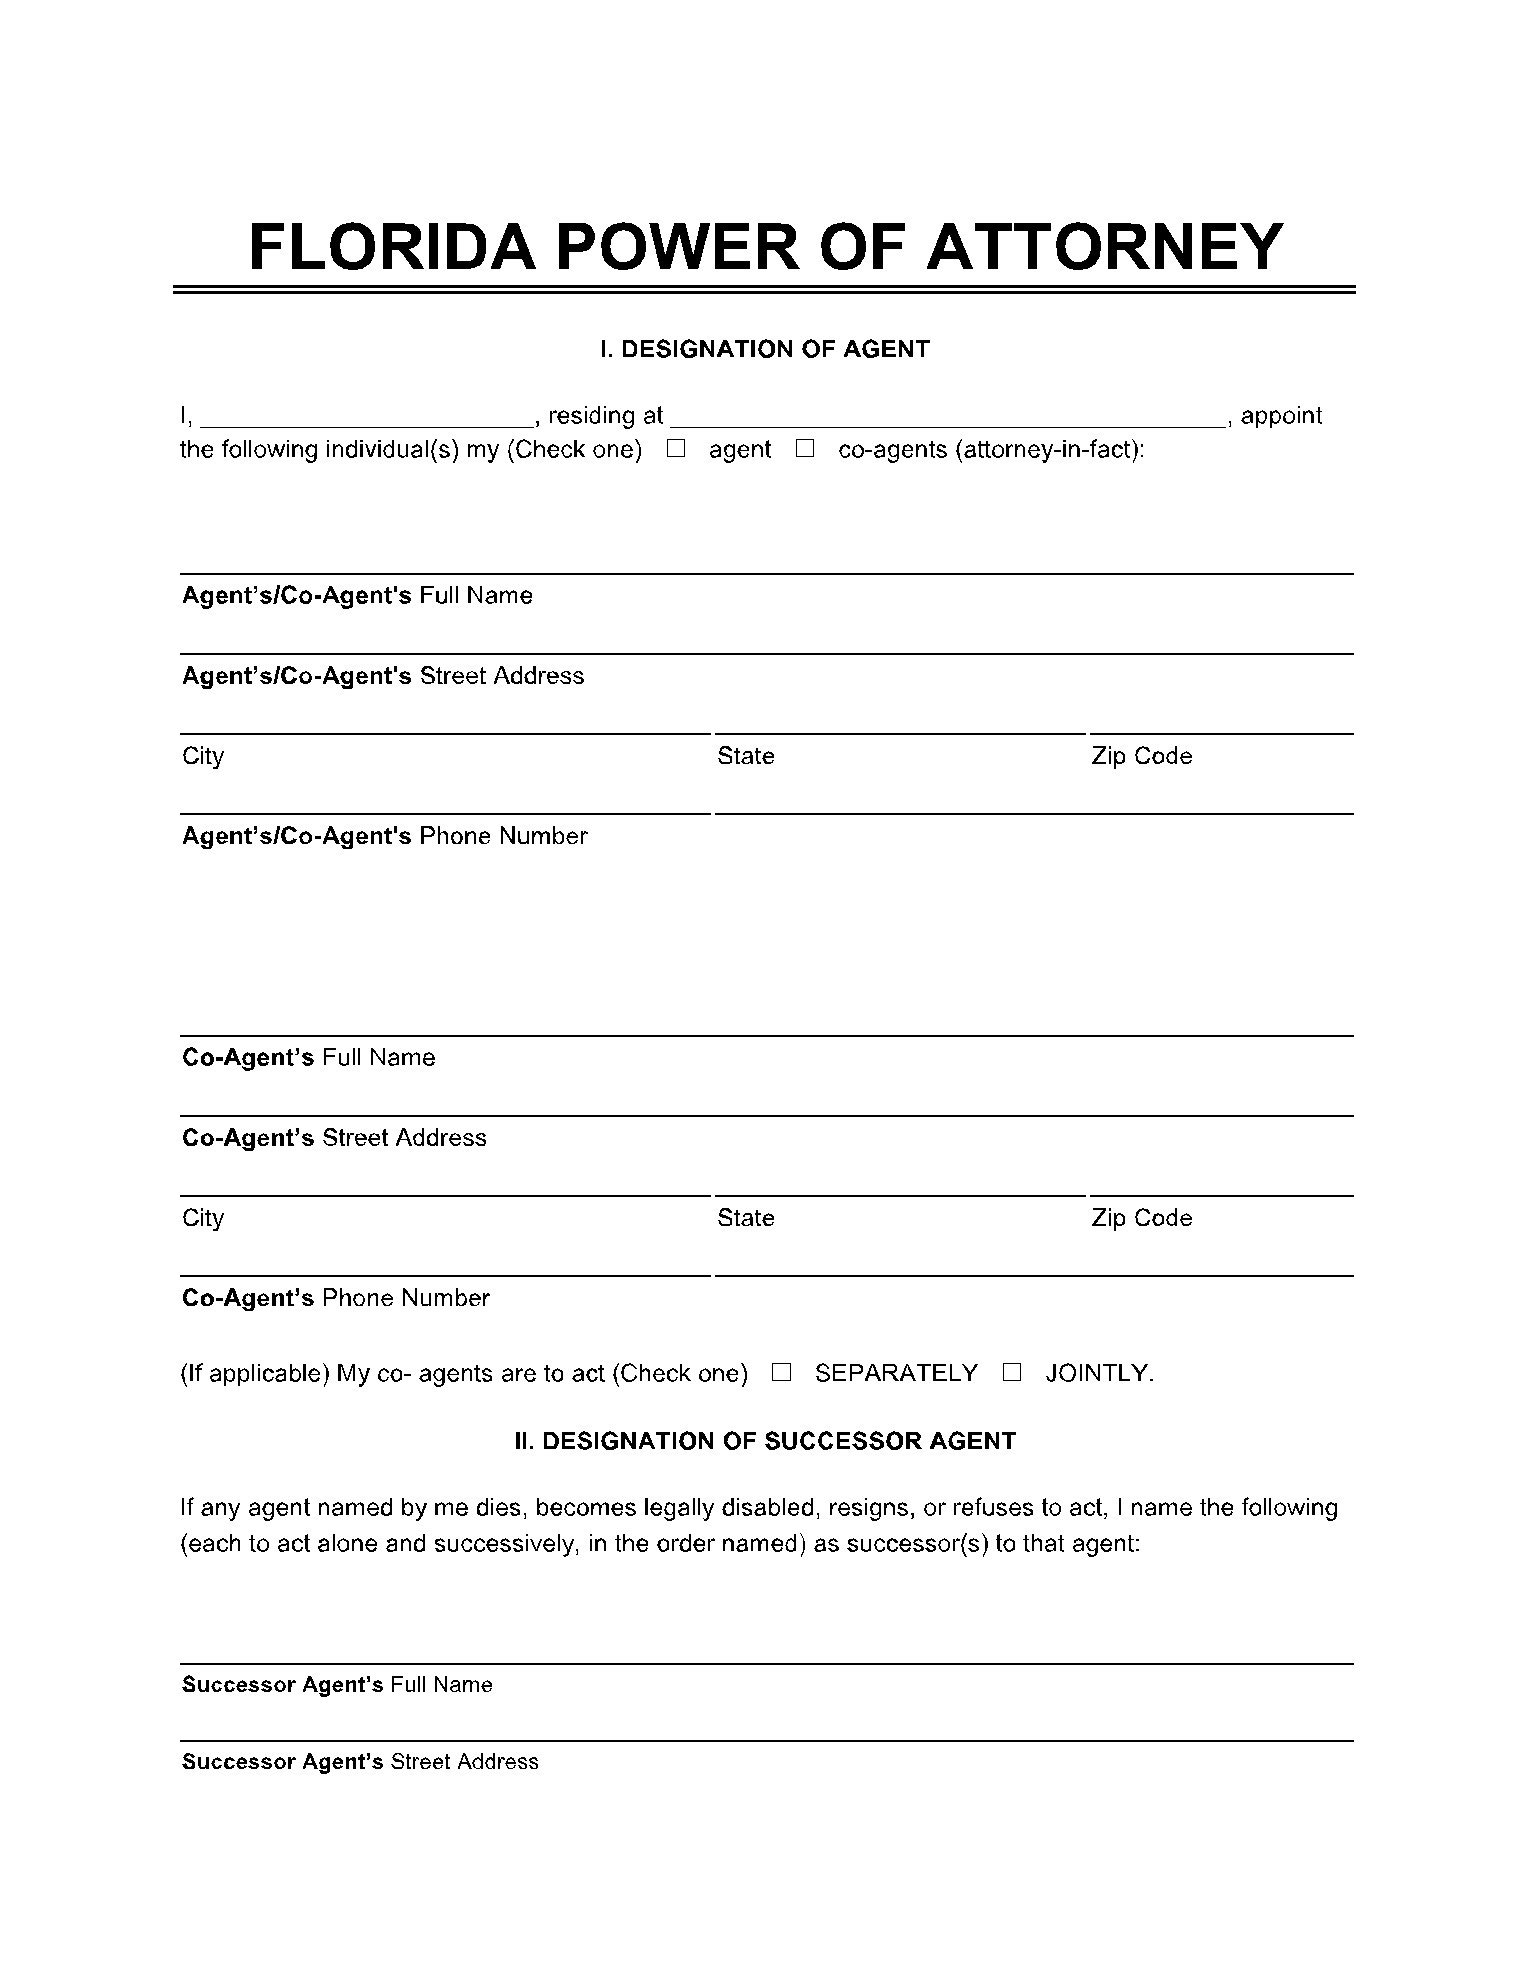 Power of Attorney Forms Florida